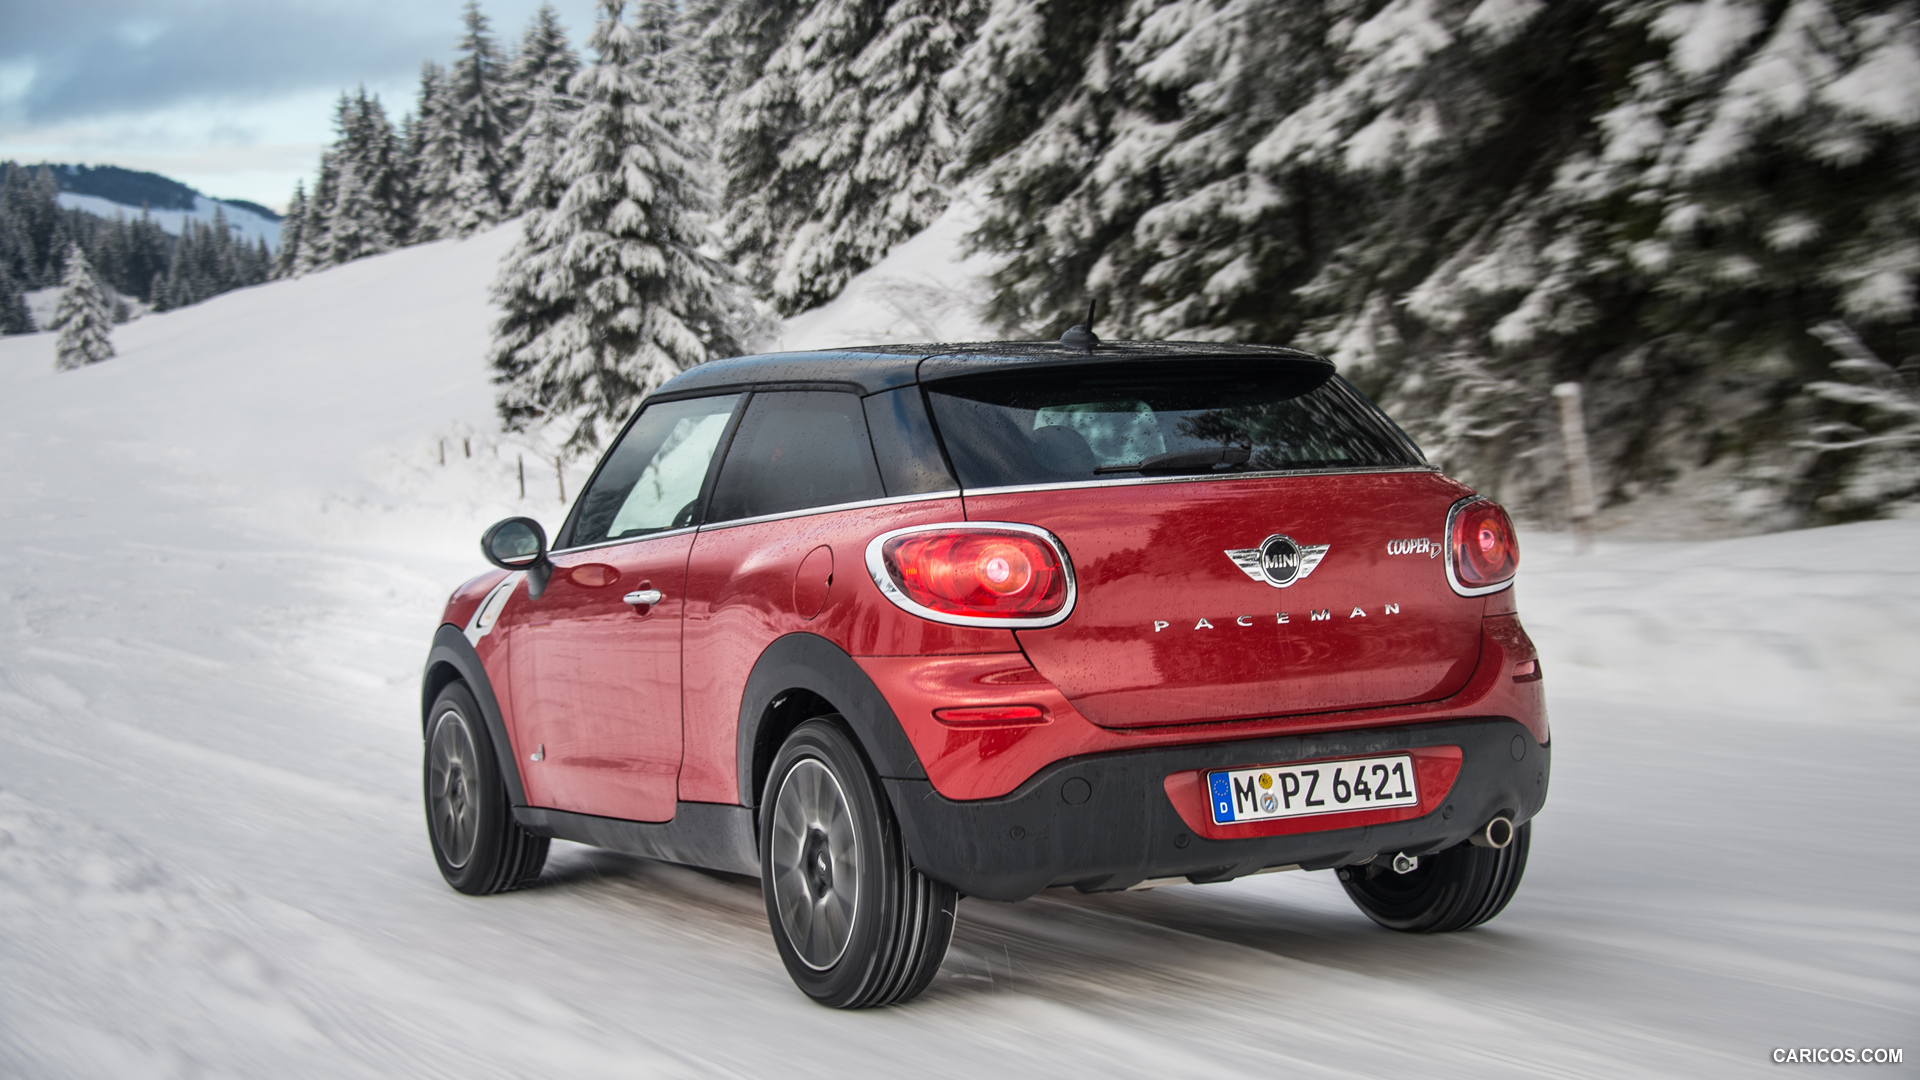 2014 MINI Cooper D Paceman ALL4 in Snow - Rear, #8 of 25